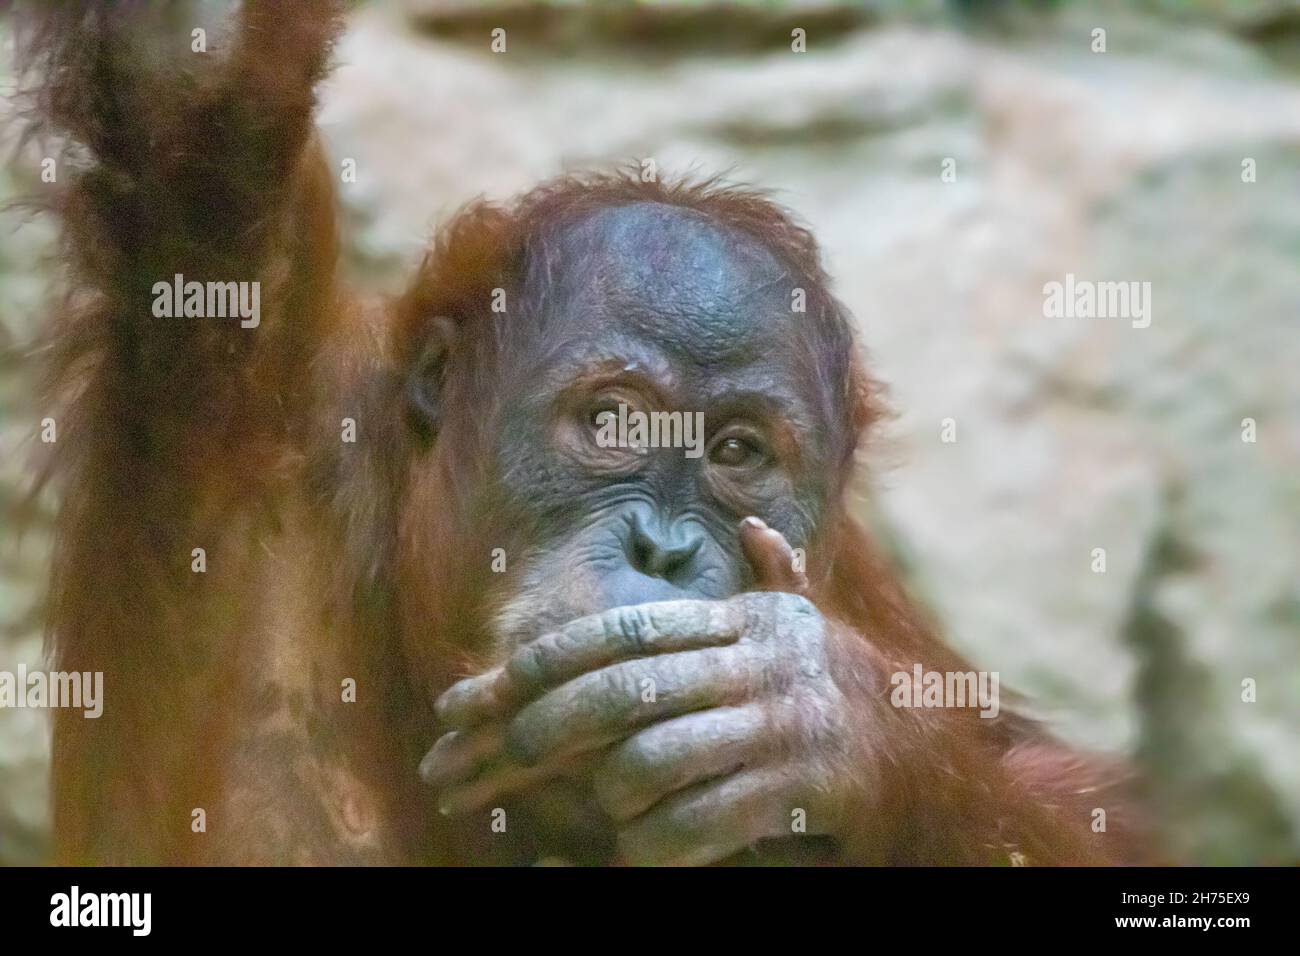 Young Orang-Utan holding its hand over its mouth Stock Photo